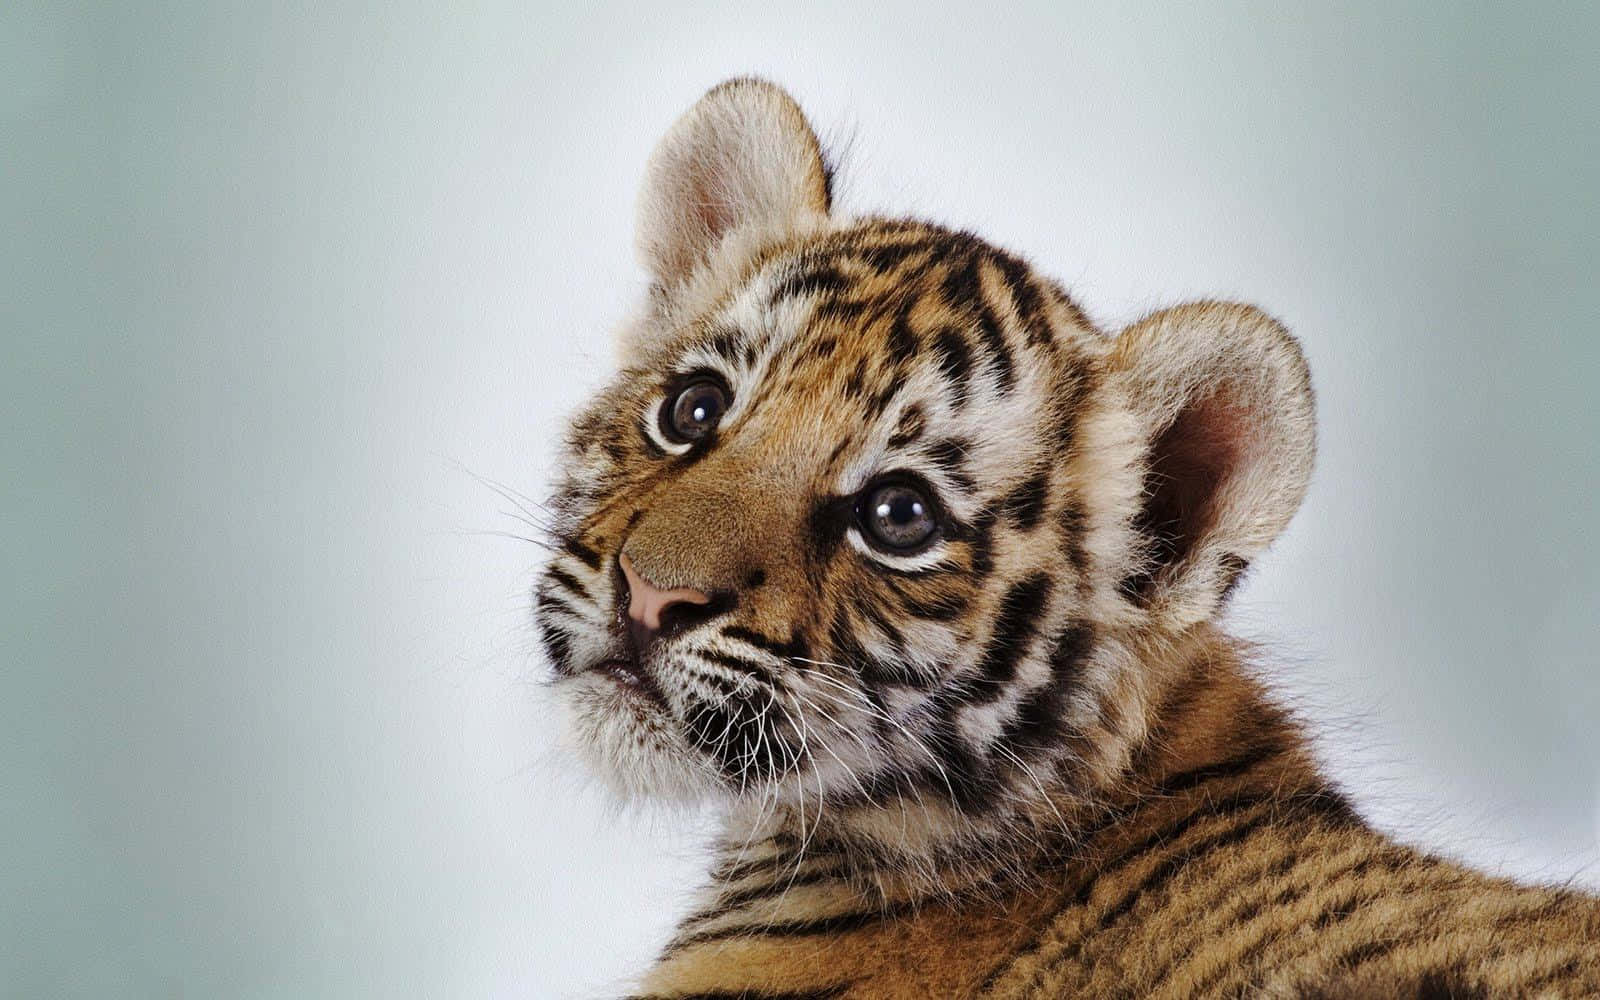 Could this cute baby animal be any cuter?